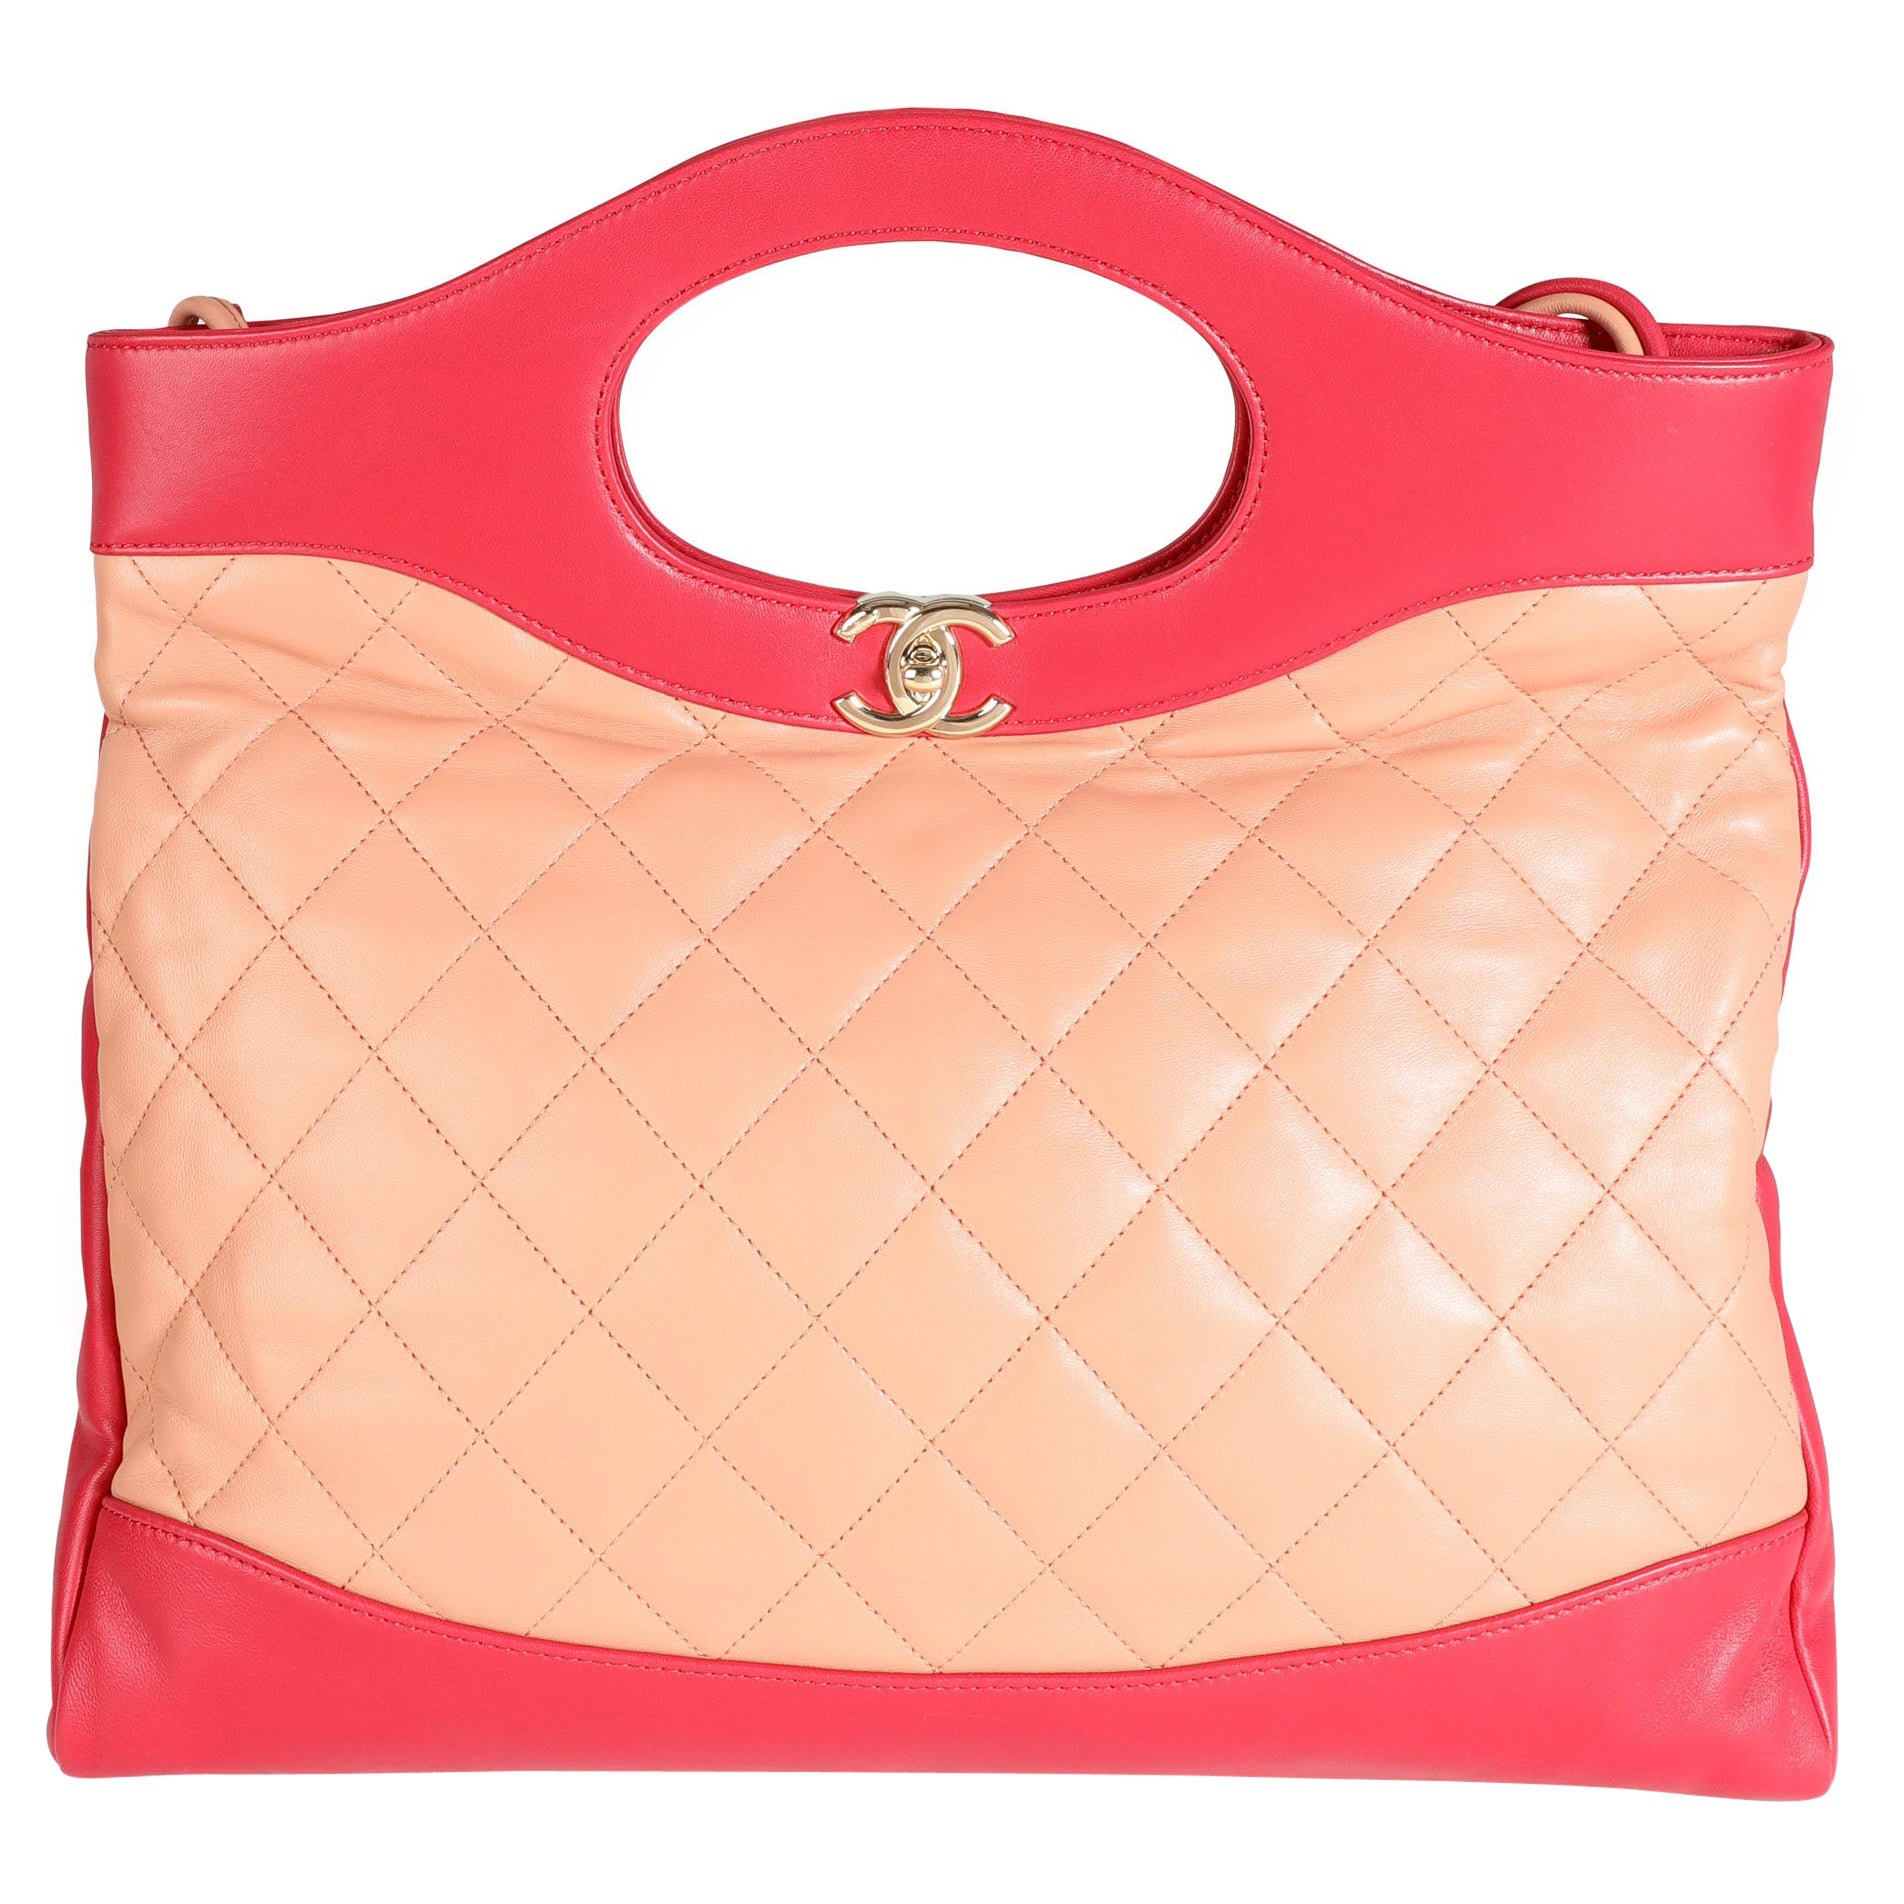 Chanel Peach & Light Red Quilted Calfskin Large 31 Shopping Bag